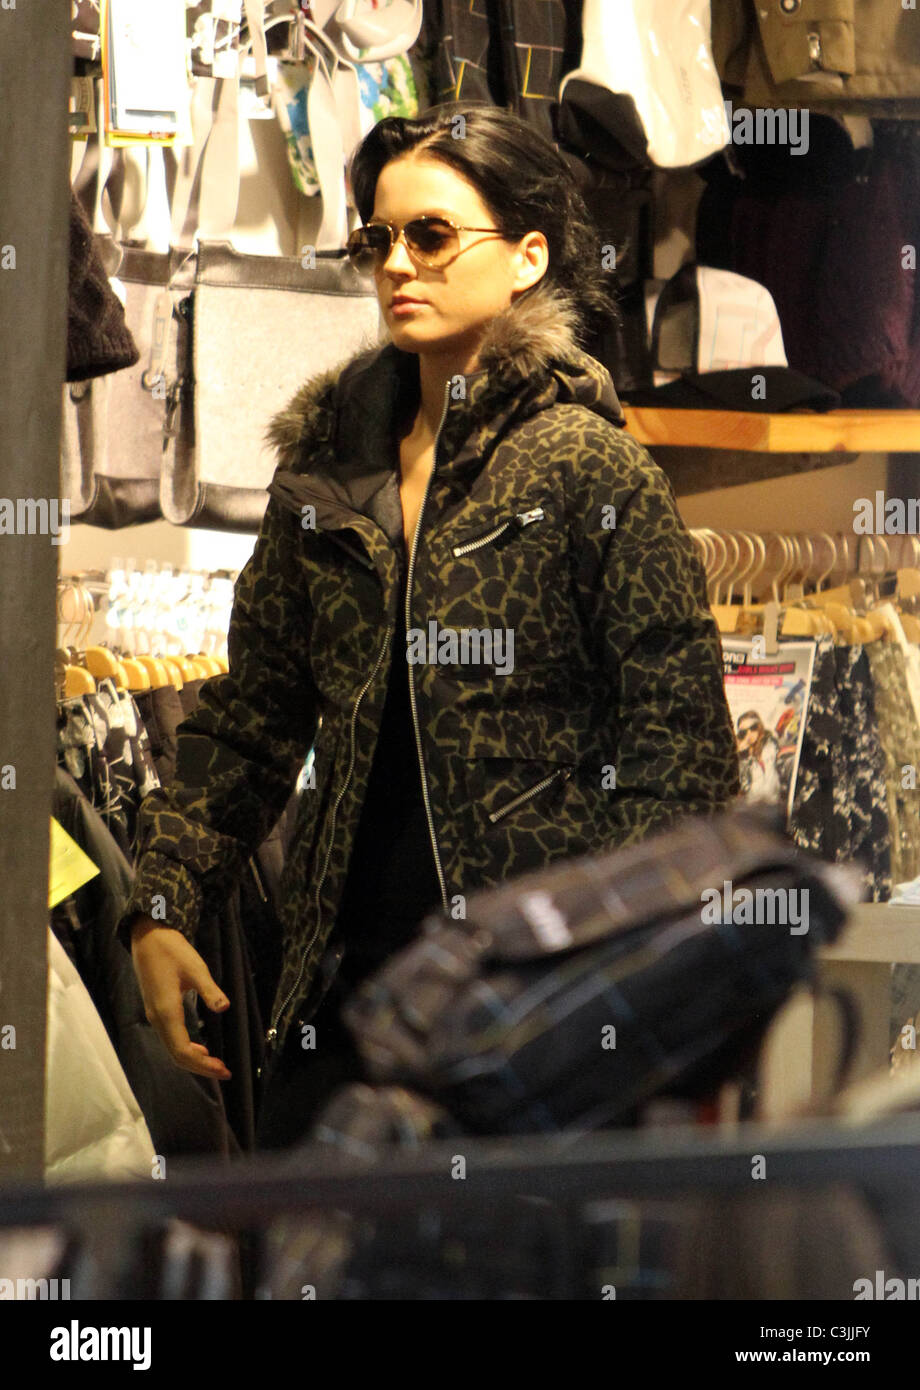 Katy Perry shops at a Burton Snowboards store Los Angeles, California - 18.11.09 Stock Photo